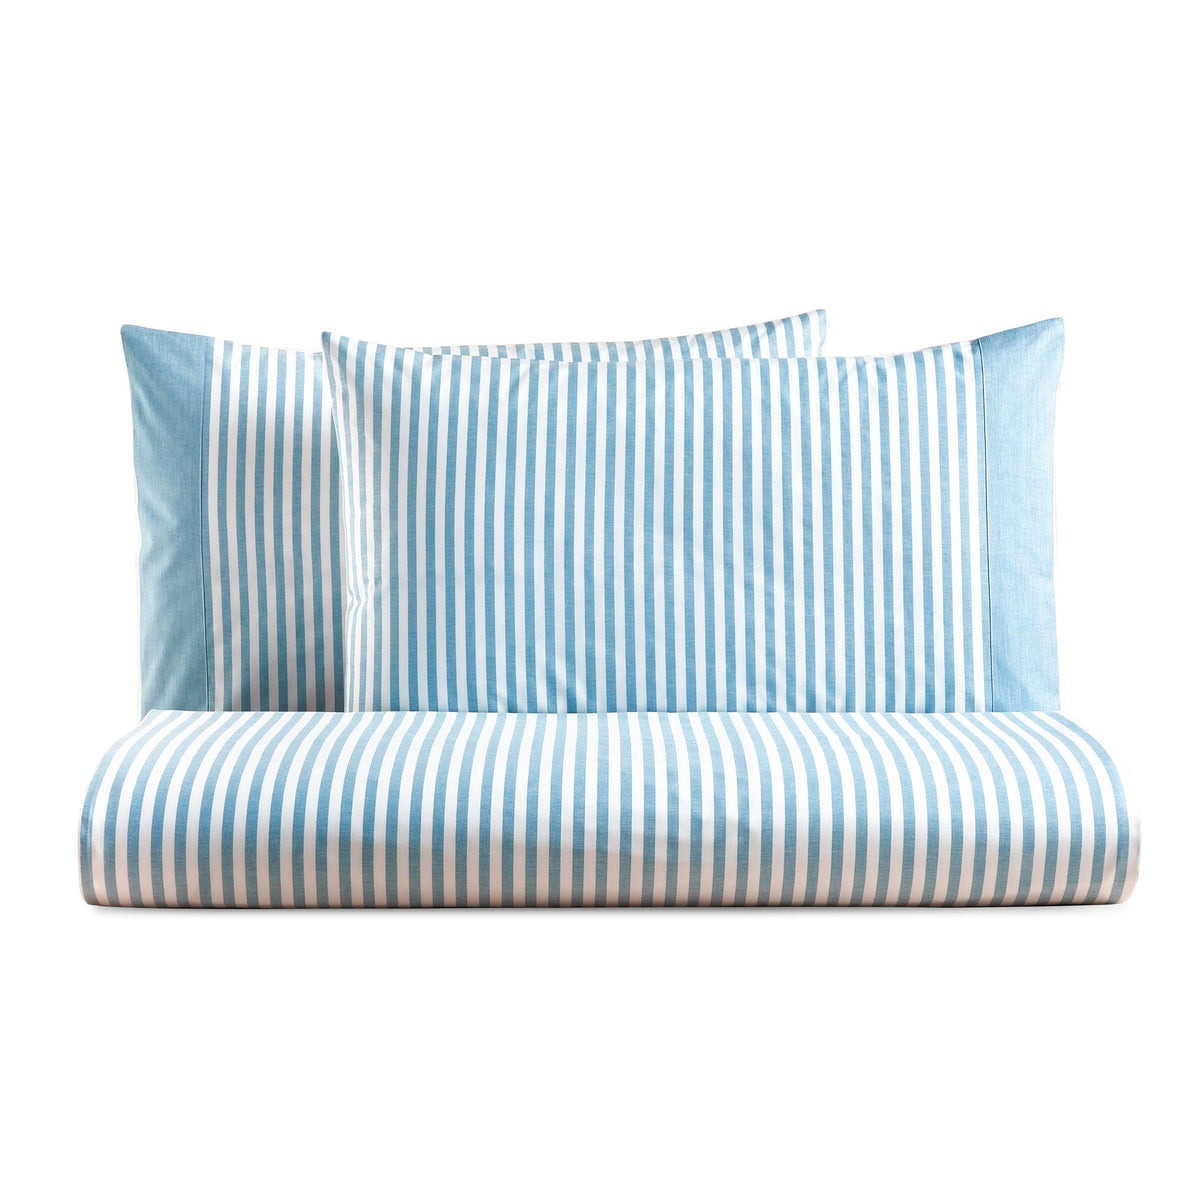 Duvet Cover Set in Pure Yarn-Dyed Striped Cotton - Tif